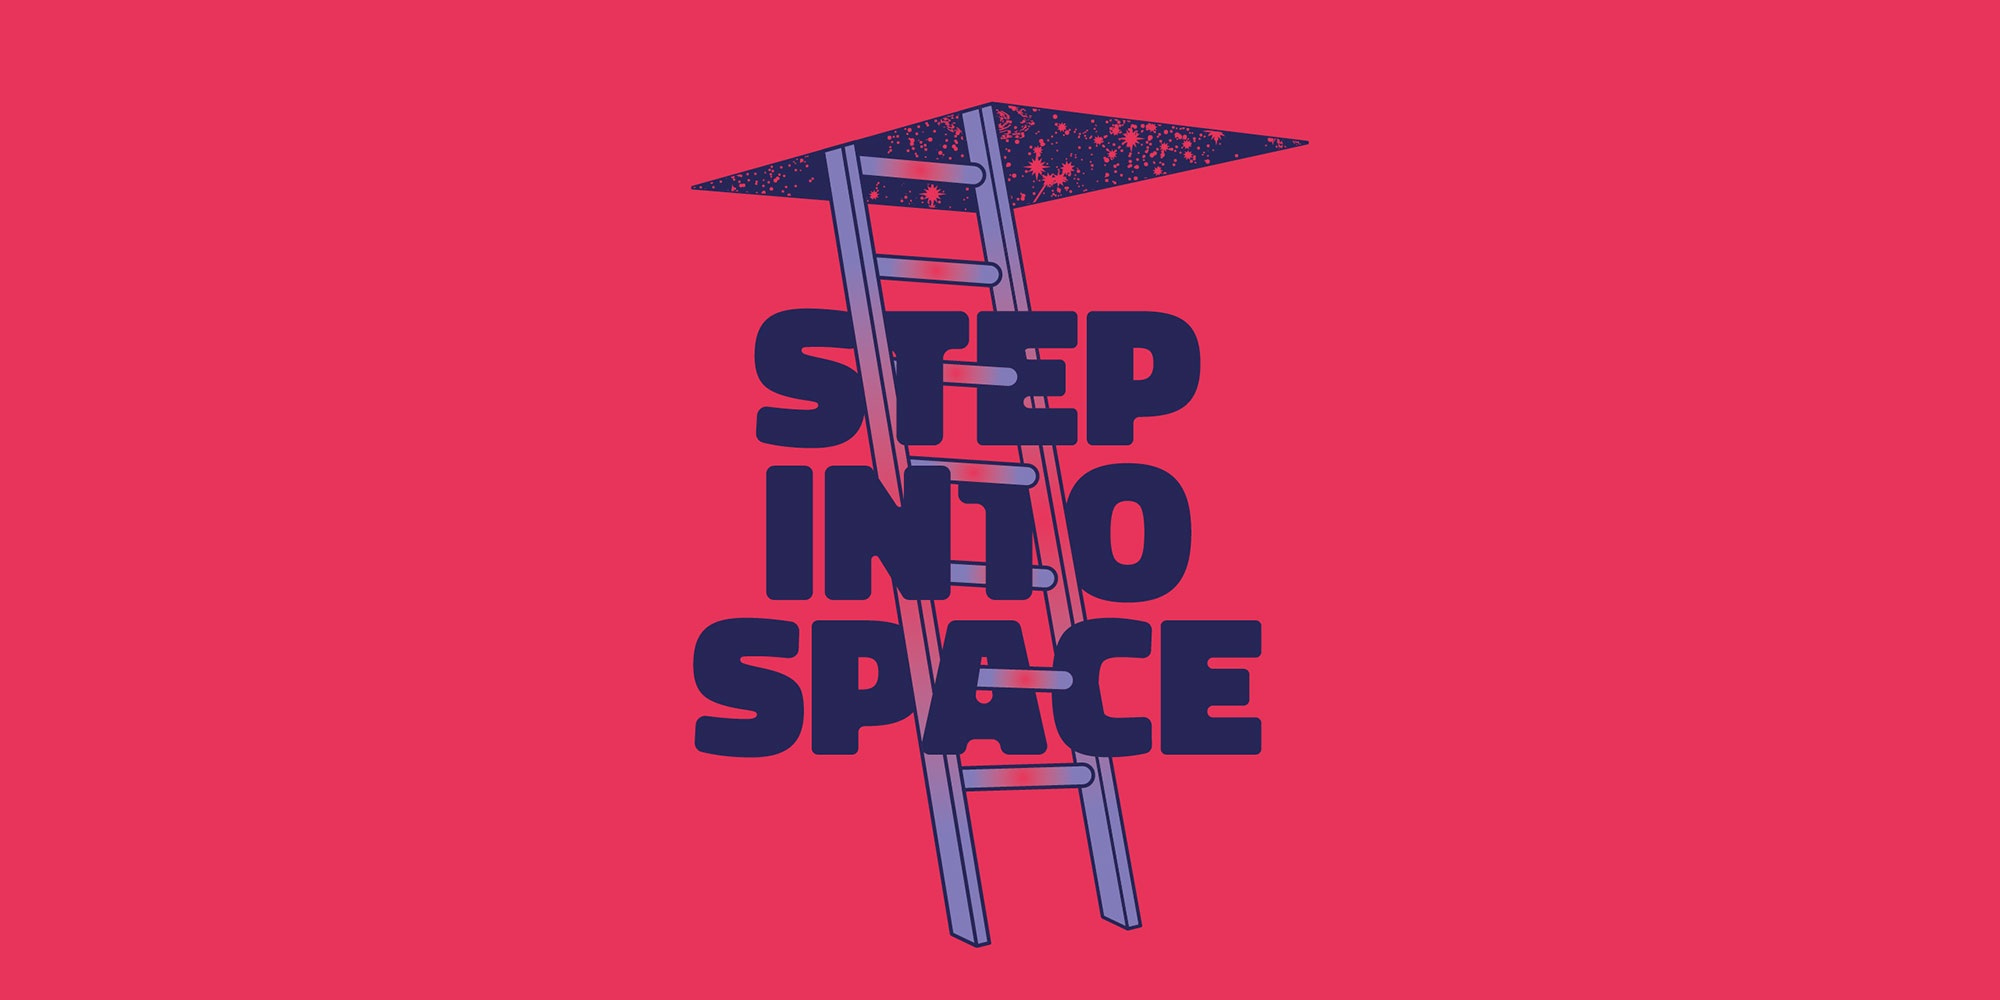 Digital_Artwork, Step Into Space / spaceEU project